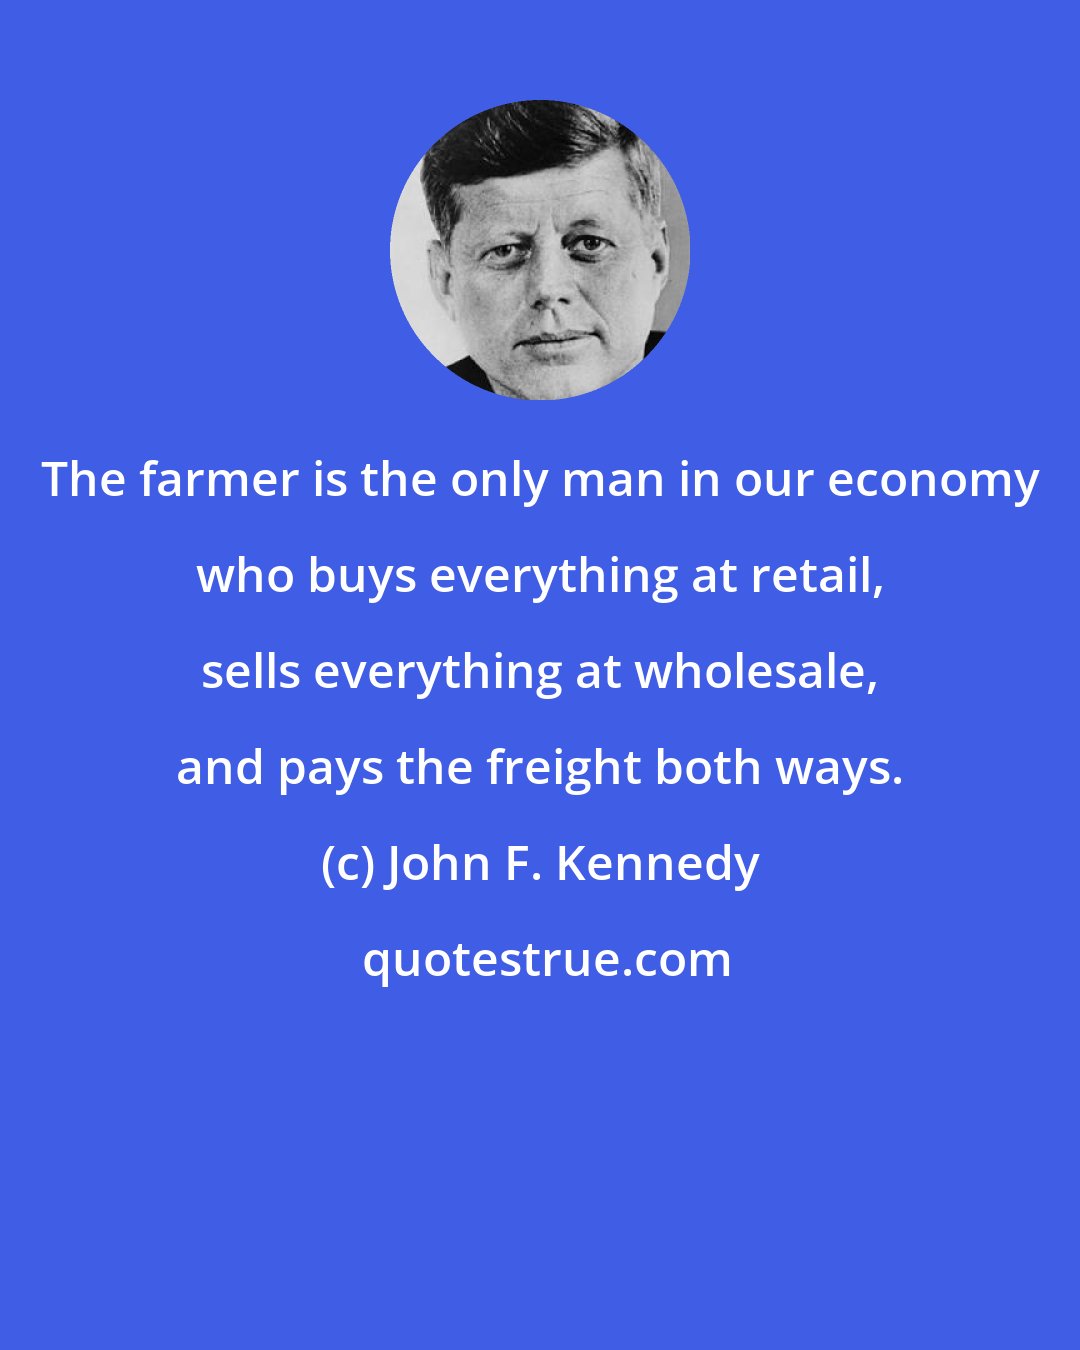 John F. Kennedy: The farmer is the only man in our economy who buys everything at retail, sells everything at wholesale, and pays the freight both ways.